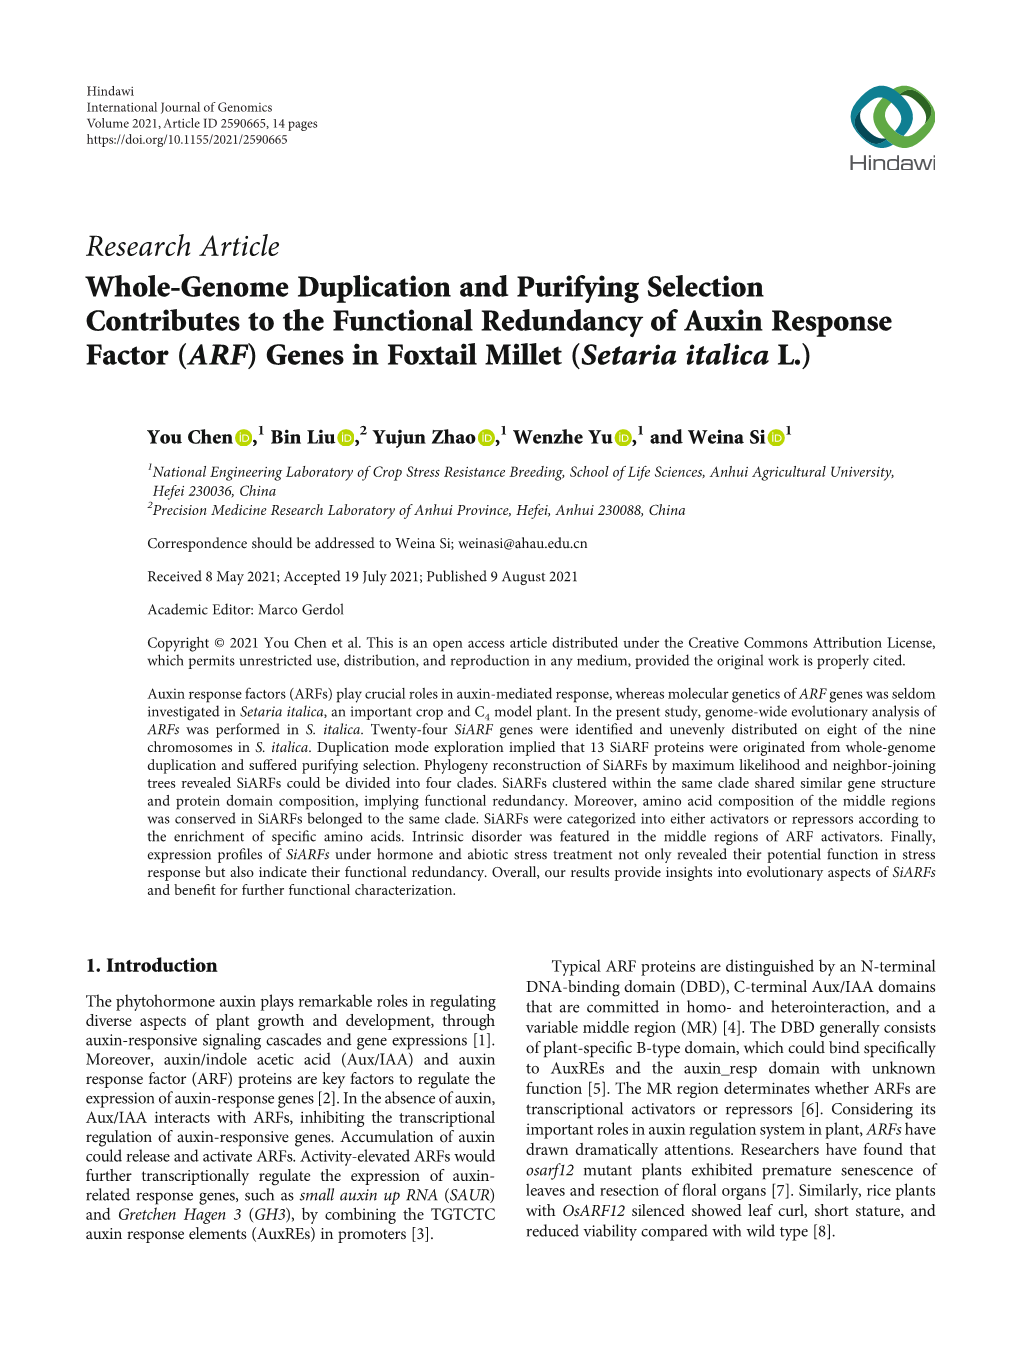 Whole-Genome Duplication and Purifying Selection Contributes to the Functional Redundancy of Auxin Response Factor (ARF) Genes in Foxtail Millet (Setaria Italica L.)